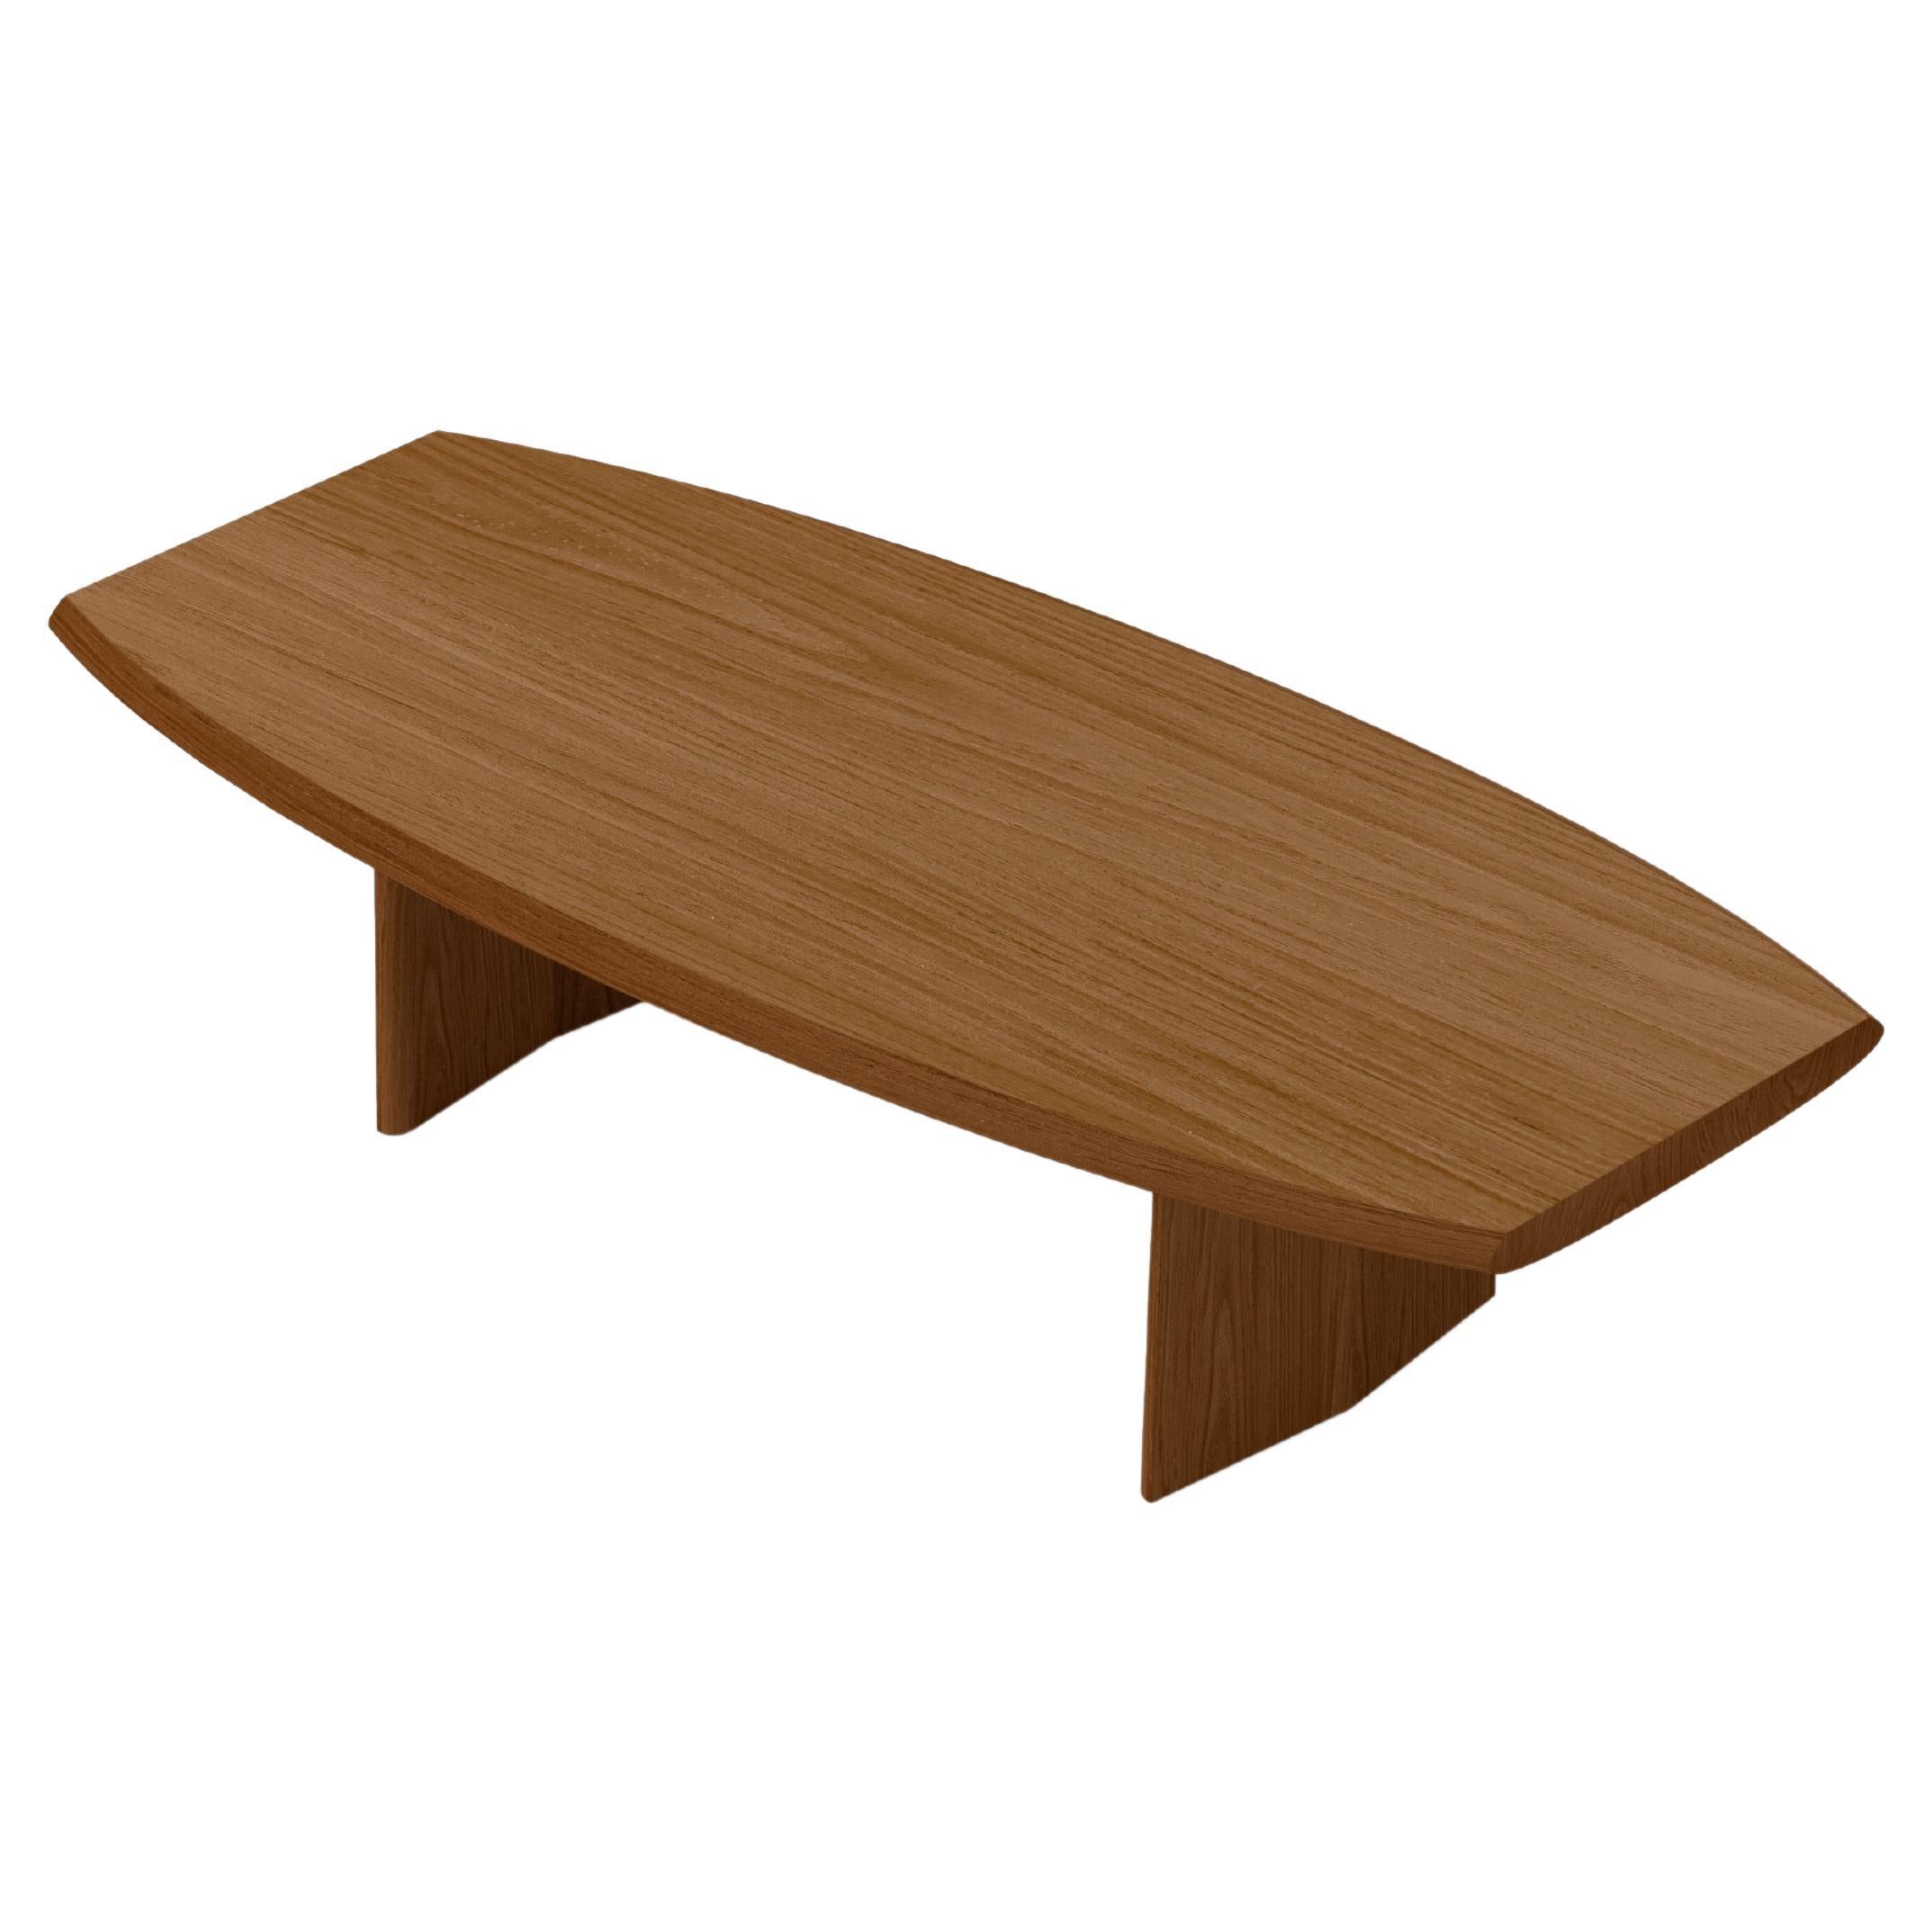 Peana Coffee Table, Bench in Red Tinted Solid Wood Finish by Joel Escalona en vente